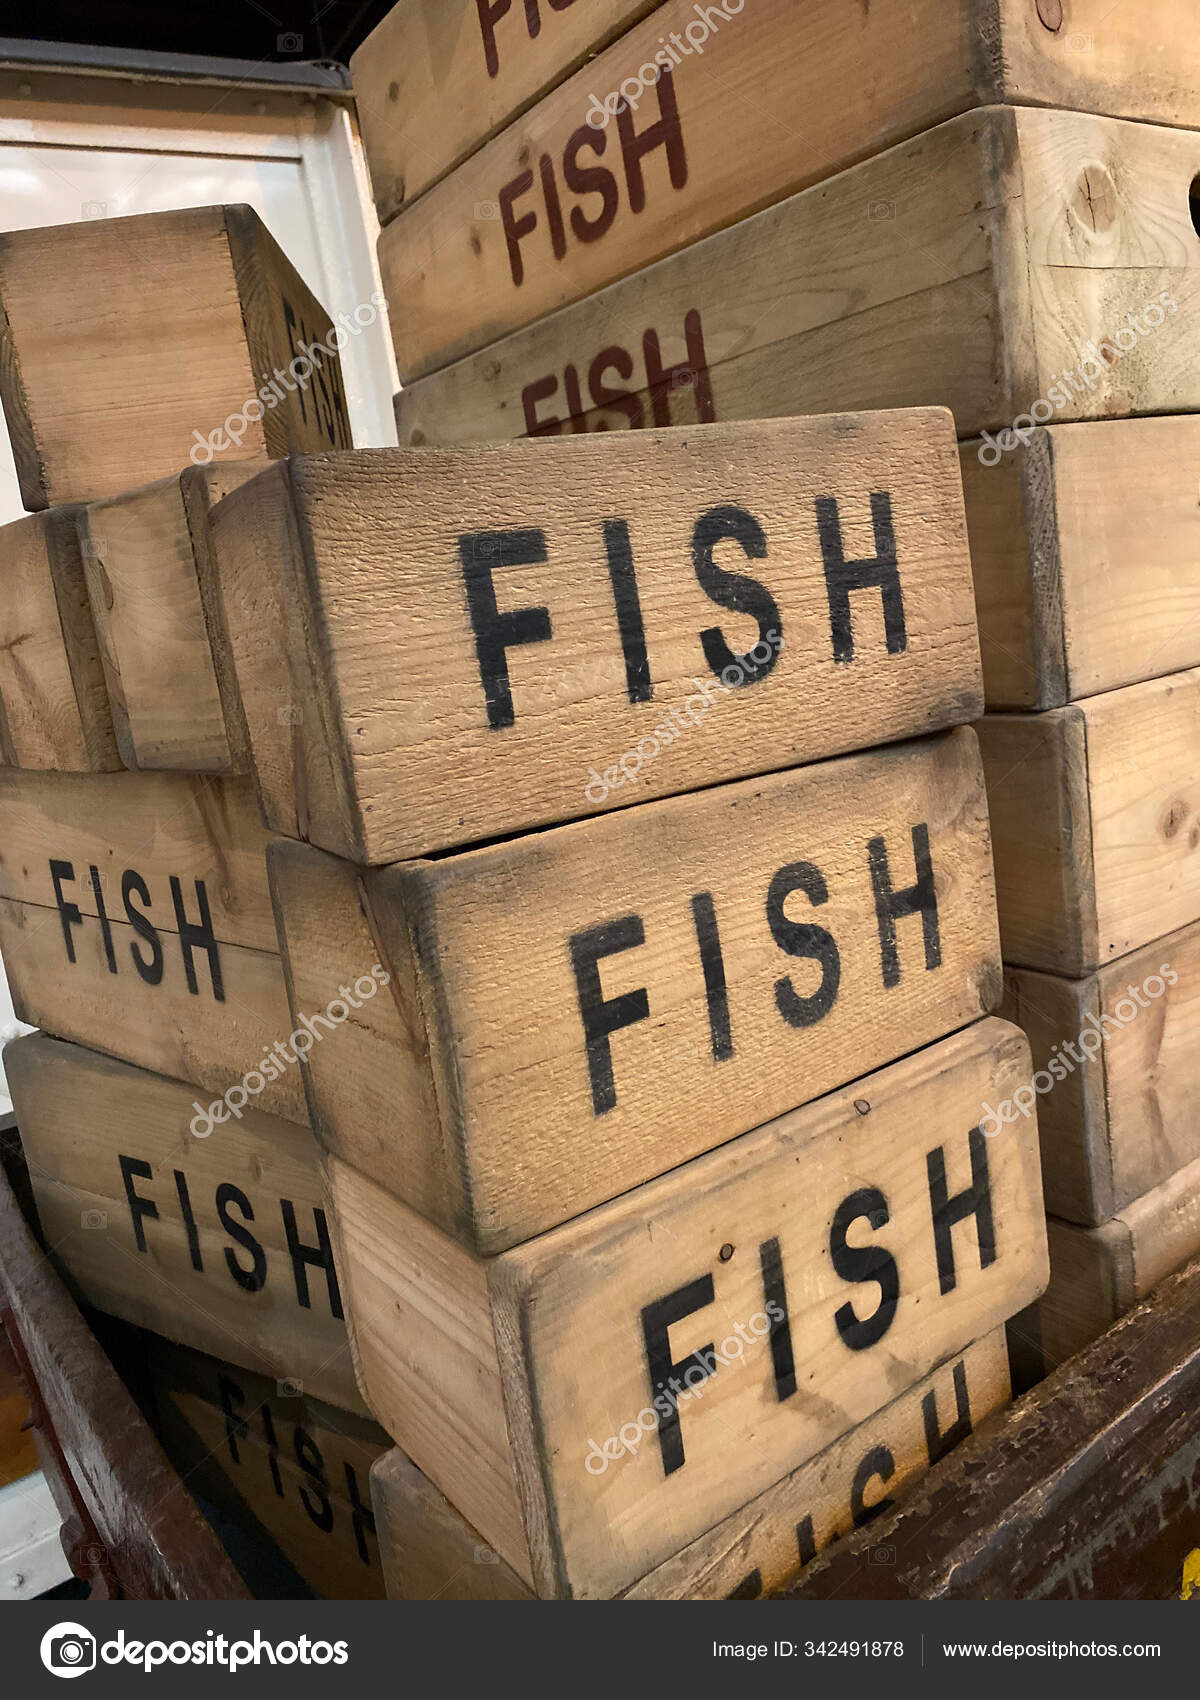 Wooden fish boxes — Stock Editorial Photo © Steve_Allen #342491878